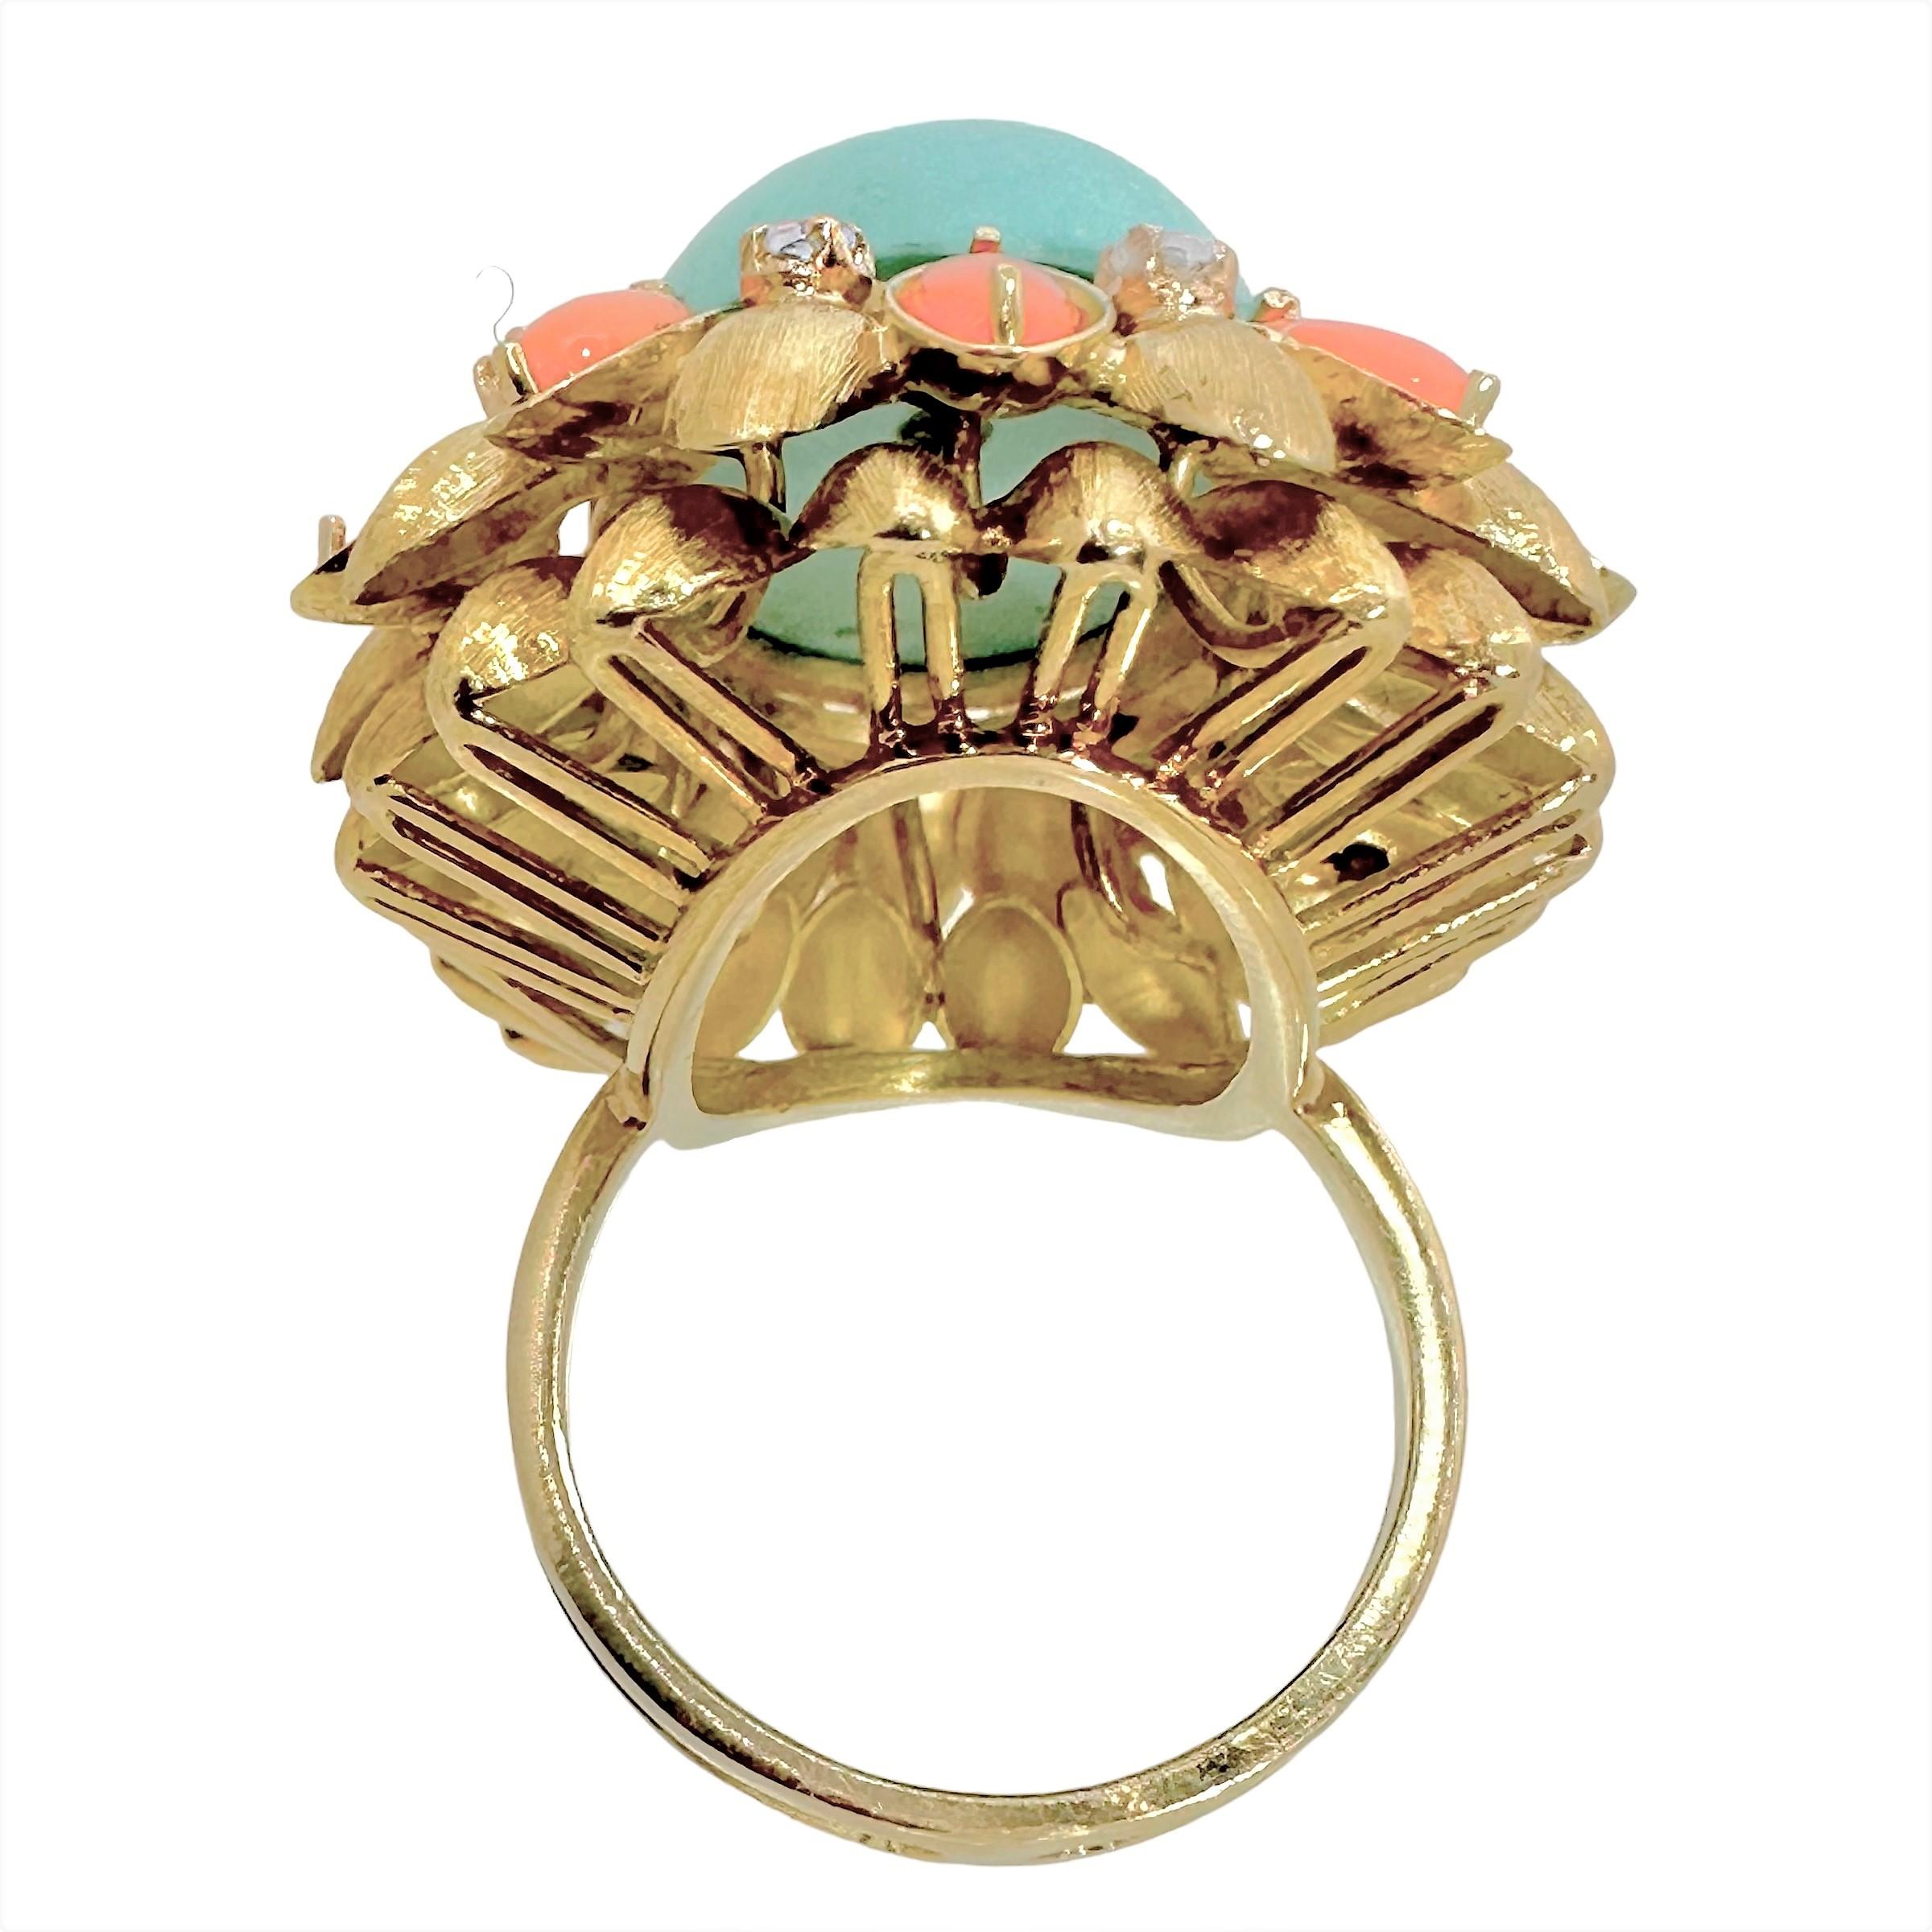 Cabochon Large Scale Mid-20th Century 18K Yellow Gold, Coral, Turquoise and Diamond Ring